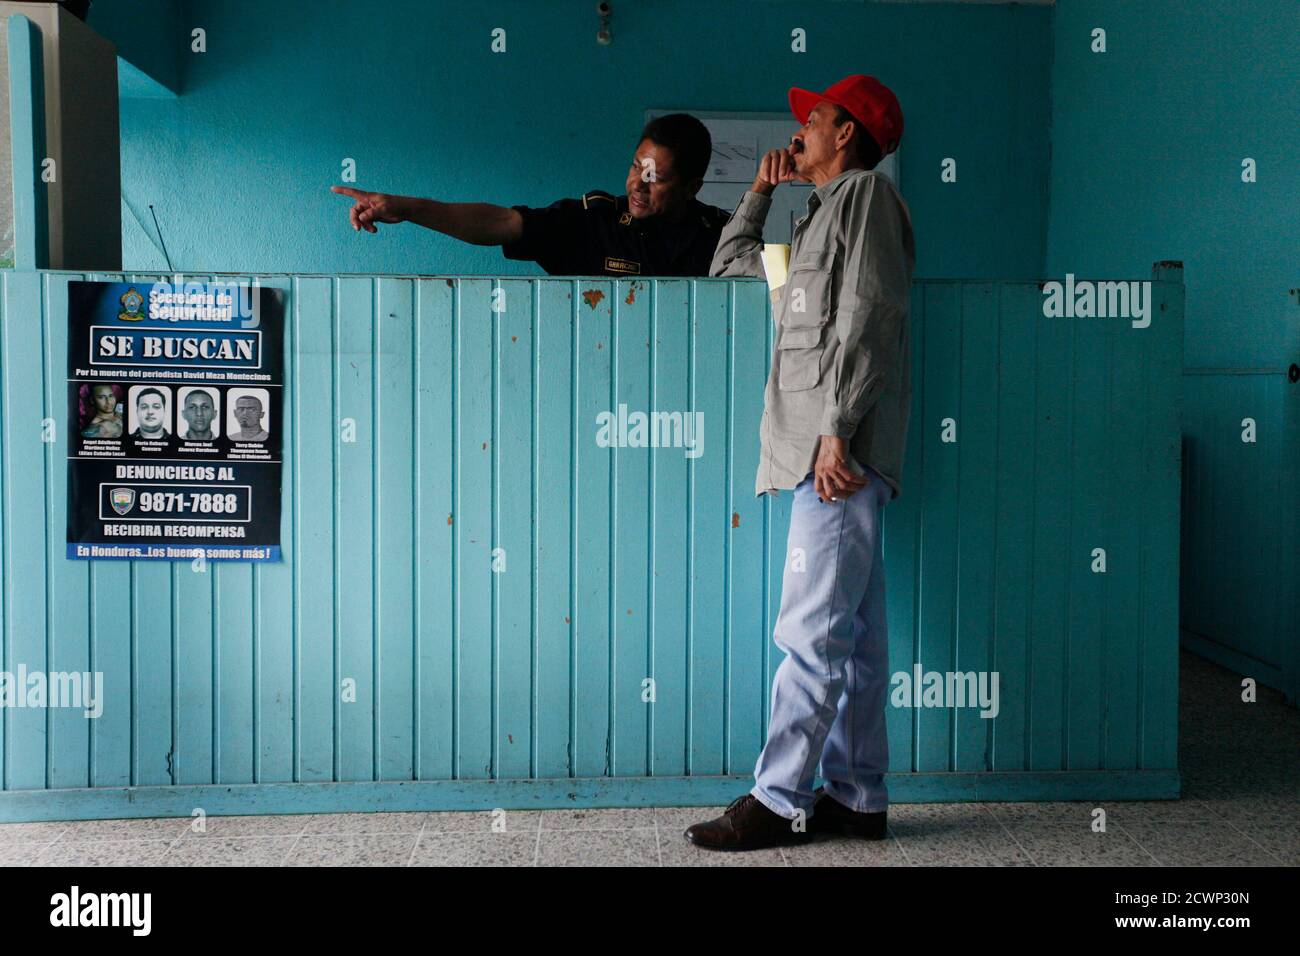 A citizen speaks to a policeman at the reception next to a wanted poster at Tegucigalpa police station October 15, 2010. From (L-R) Angel Martinez, 23, know as 'Crazy Horse'(fugitive); Mario Guevara (temporarily released for lack of evidence), Marcos Alvarez, 35, know as 'Unicorn' (captured on 22 September) and Terry Thompson (fugitive) alleged perpetrators for the murder of journalist David Meza Montecinos on March 11, according to police spokesman Leonel Sauceda in Tegucigalpa. Nine journalists have been killed and one radio announcer in Honduras during 2010, according to Honduras police. Th Stock Photo